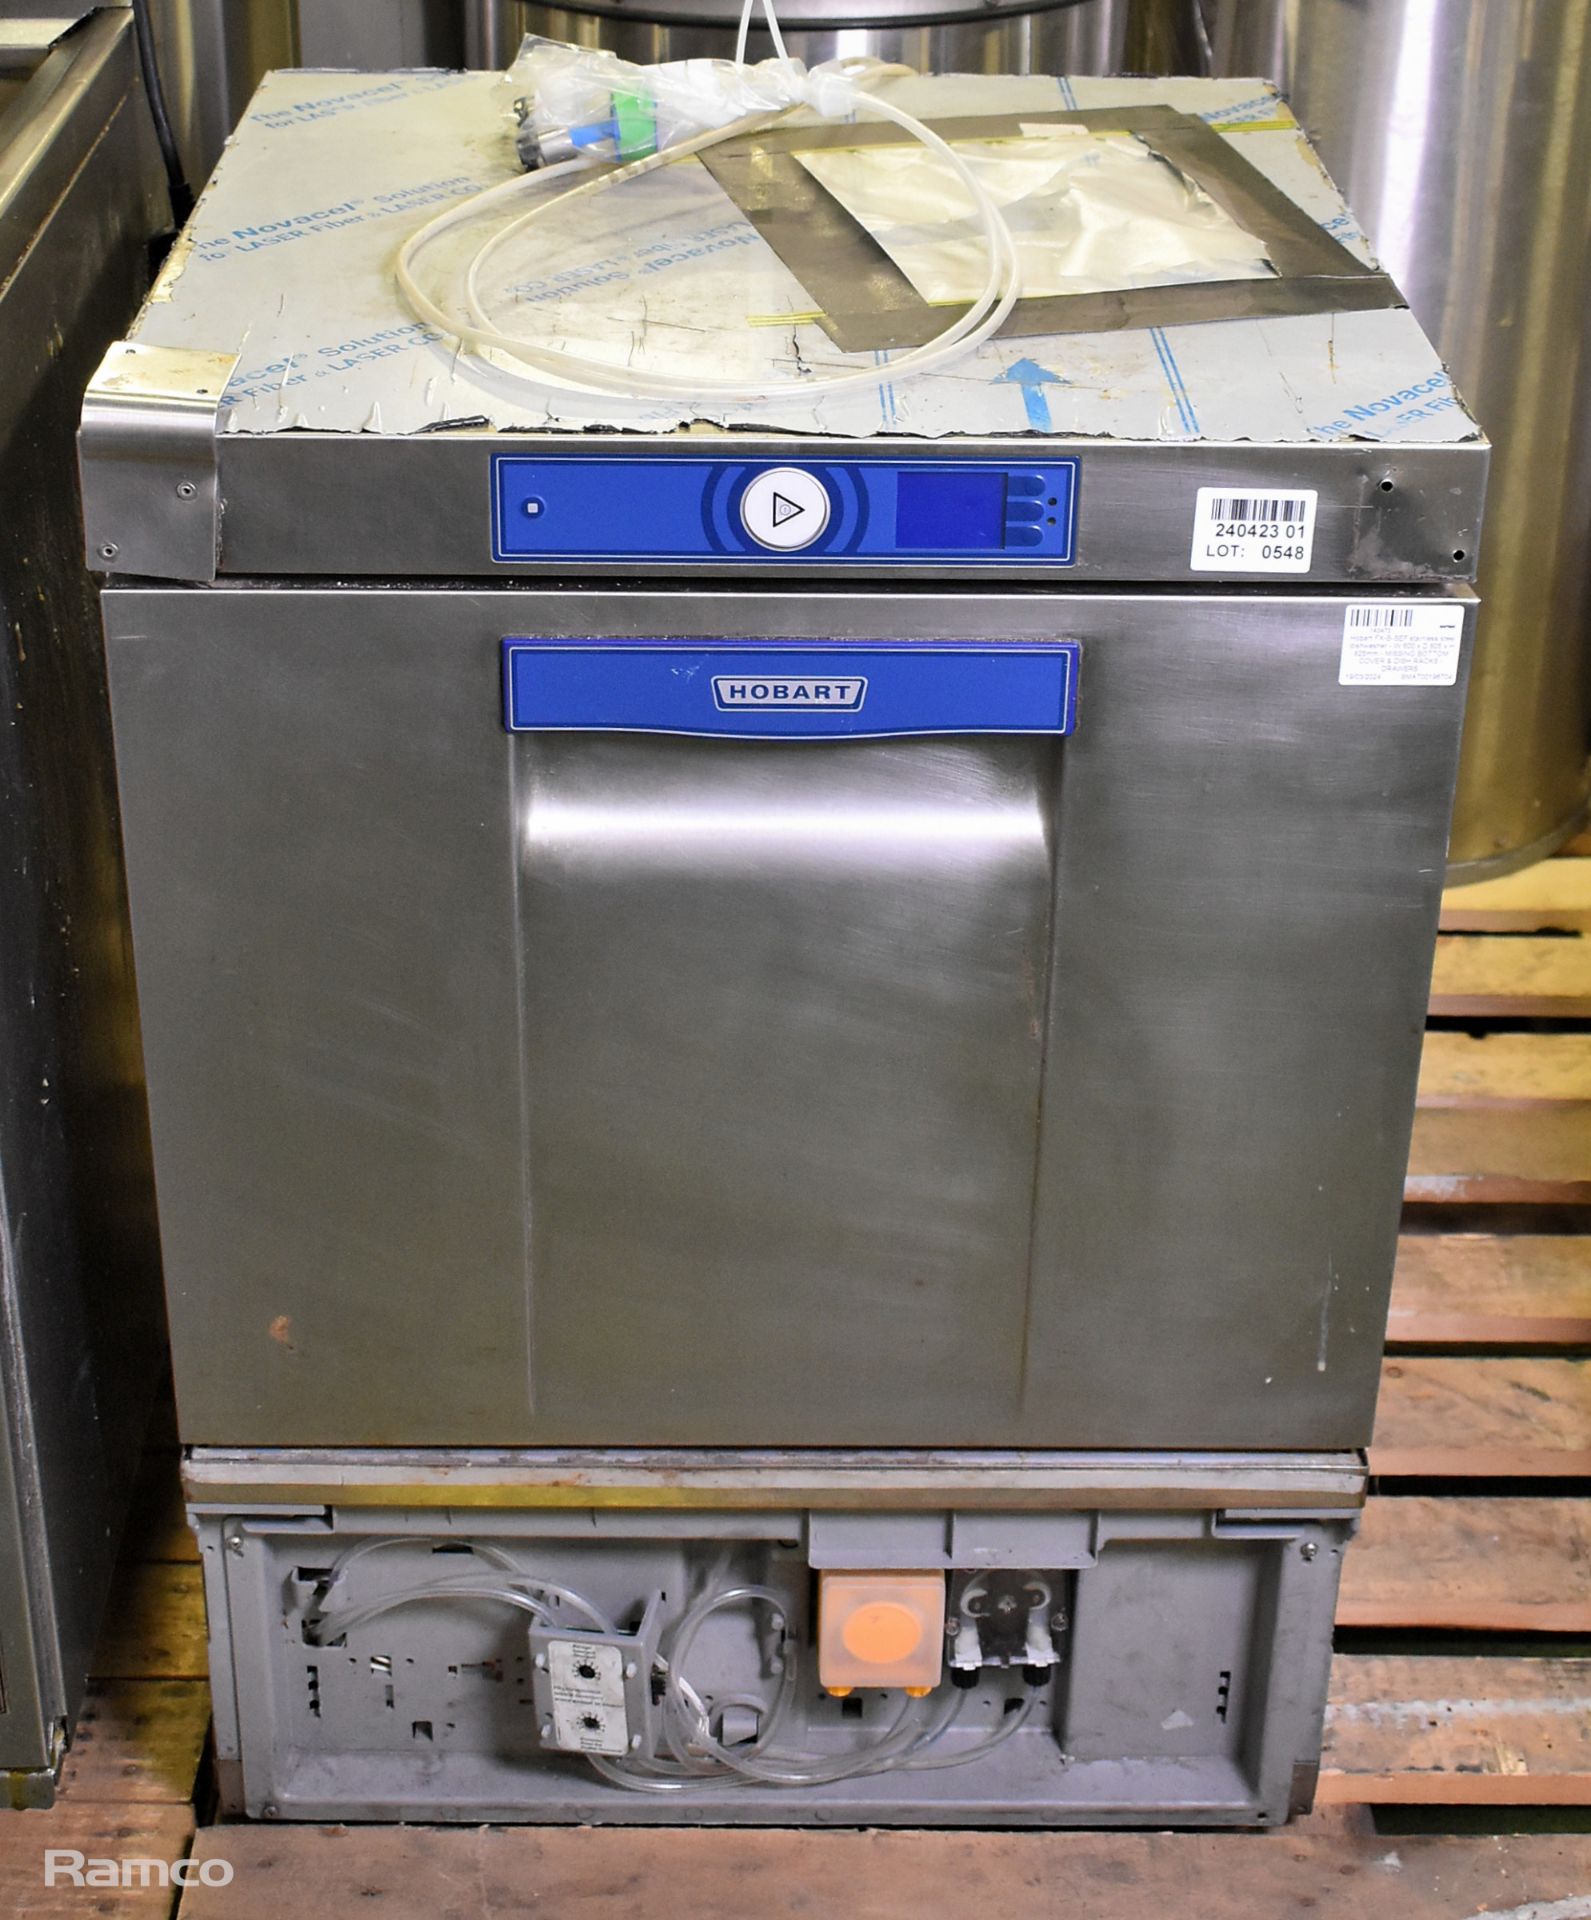 Hobart FX-B-SEF stainless steel dishwasher - W 600 x D 605 x H 825mm - MISSING BOTTOM COVER